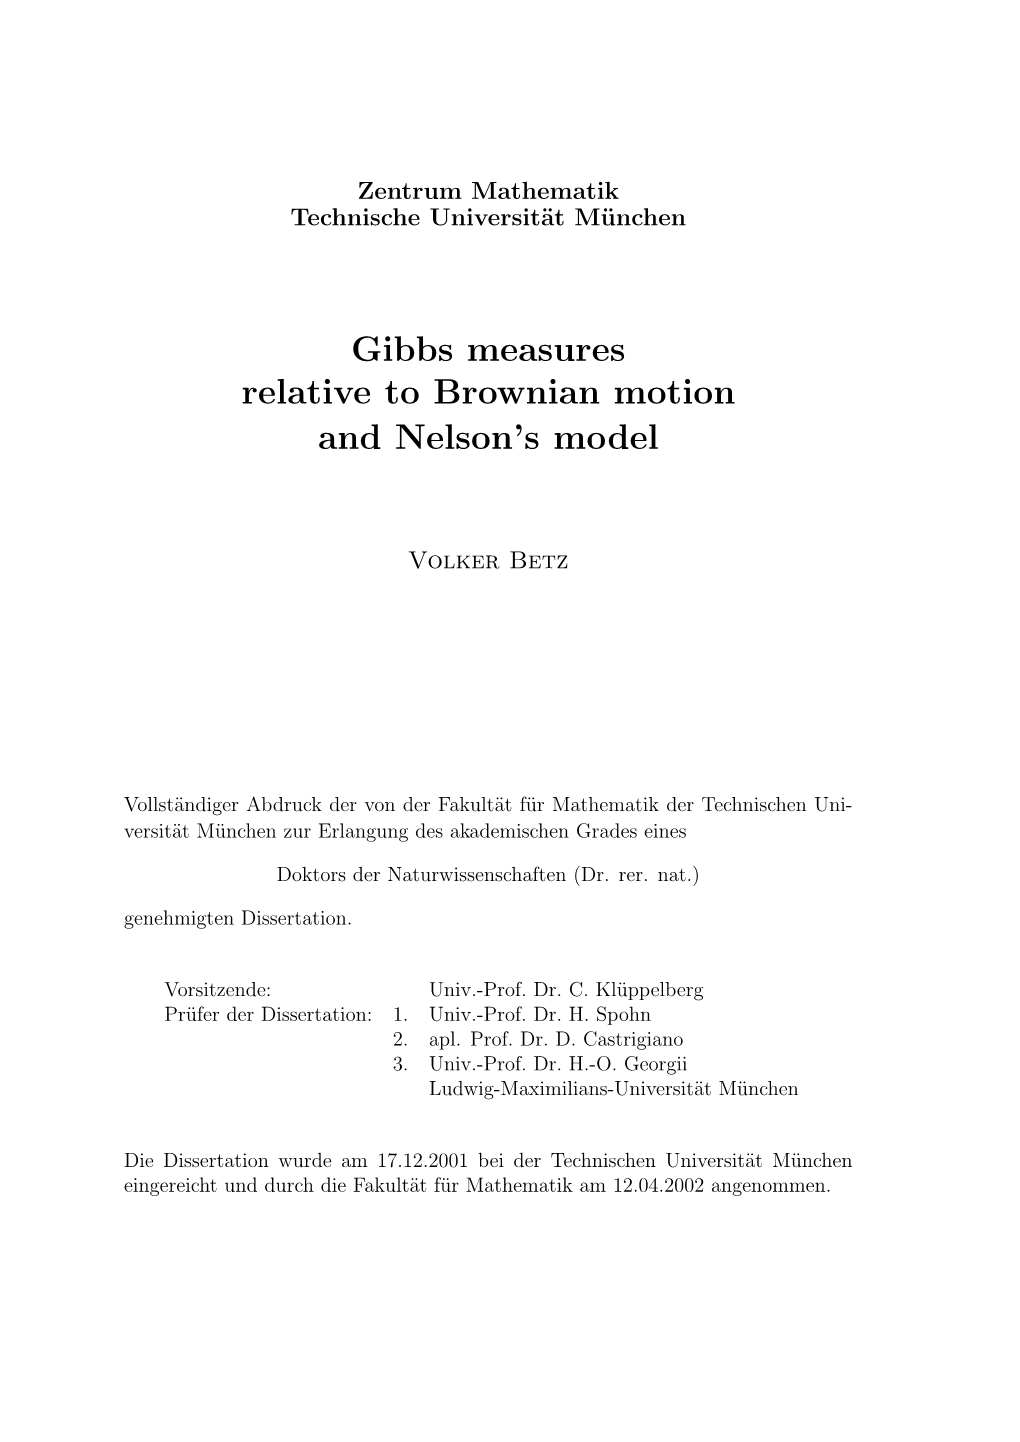 Gibbs Measures Relative to Brownian Motion and Nelson's Model